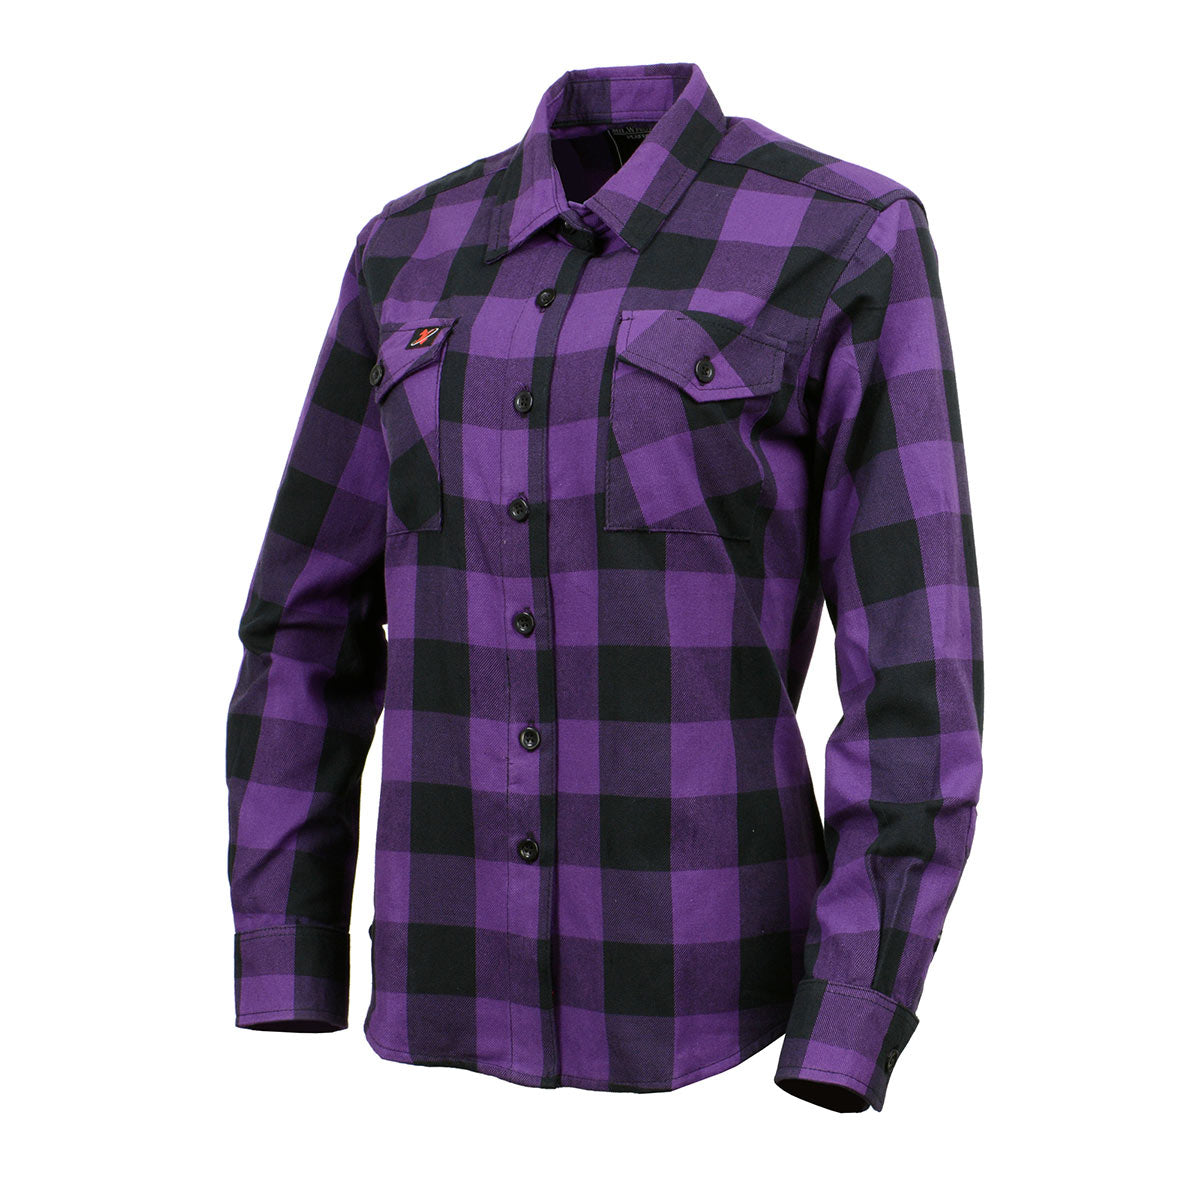 Milwaukee Leather MNG21619 Women's Black and Purple Long Sleeve Cotton Flannel Shirt